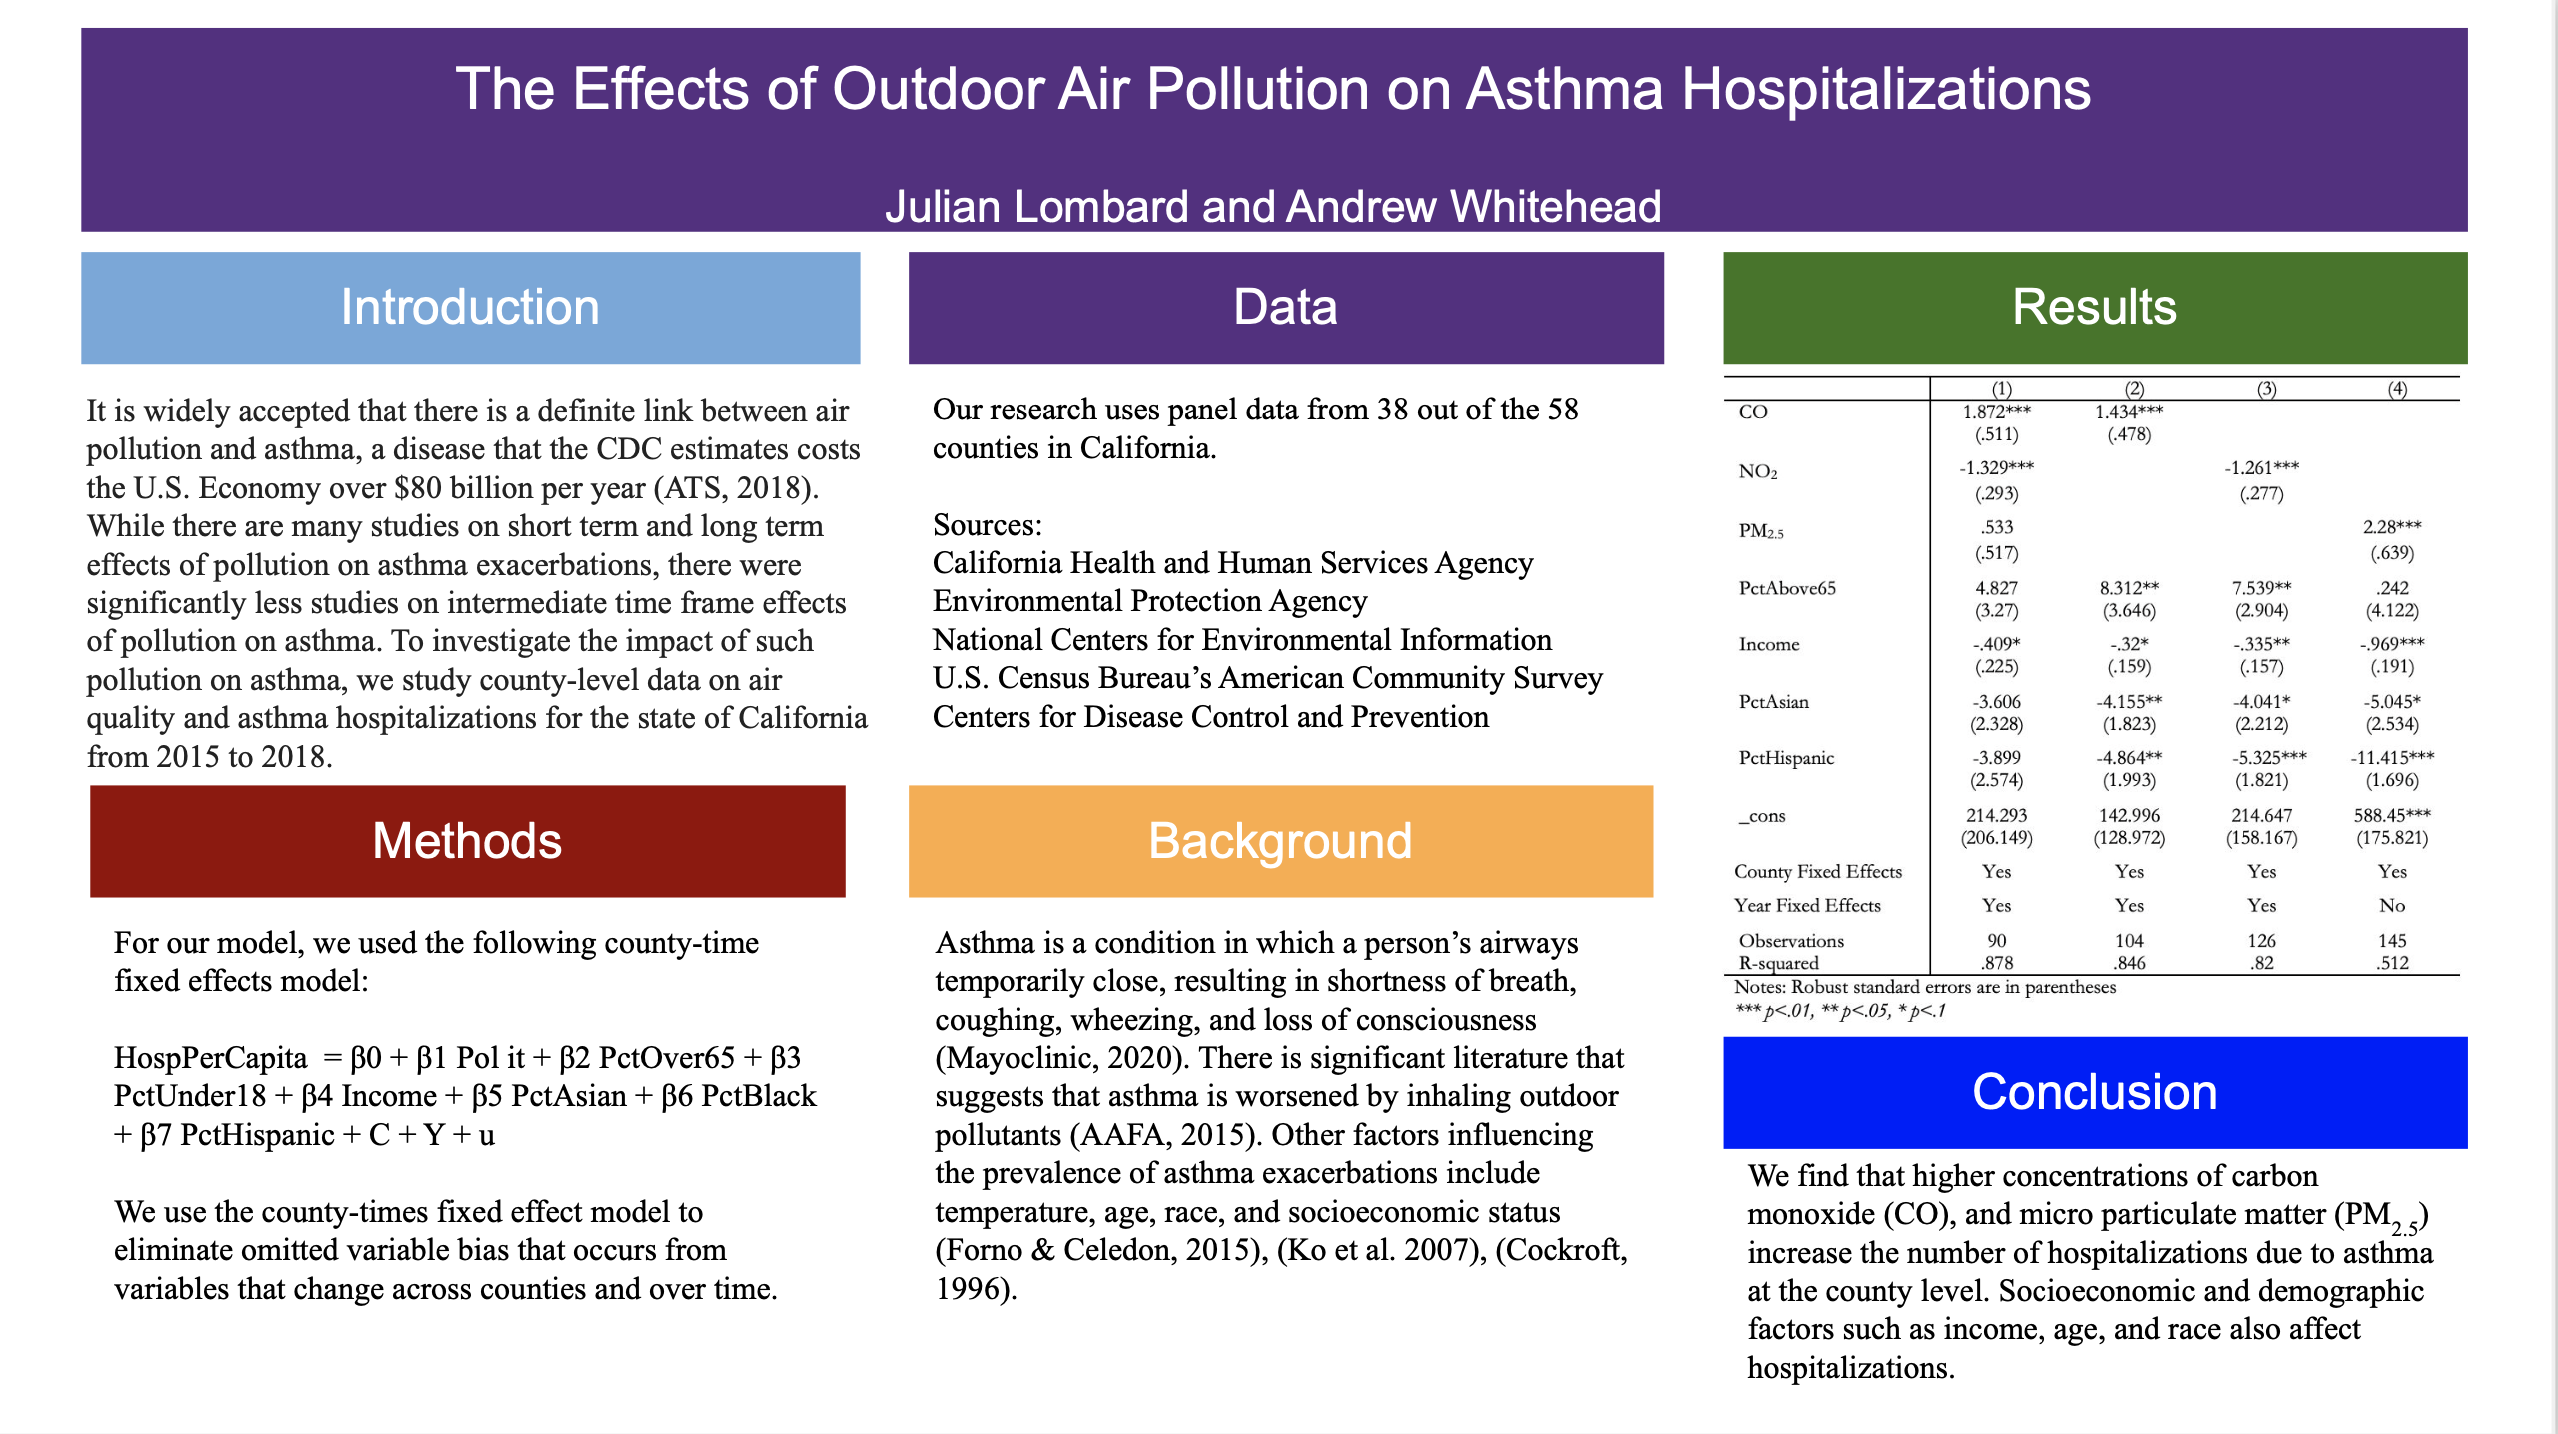 Showcase Image for The Effects of Outdoor Air Pollution on Asthma Hospitalizations